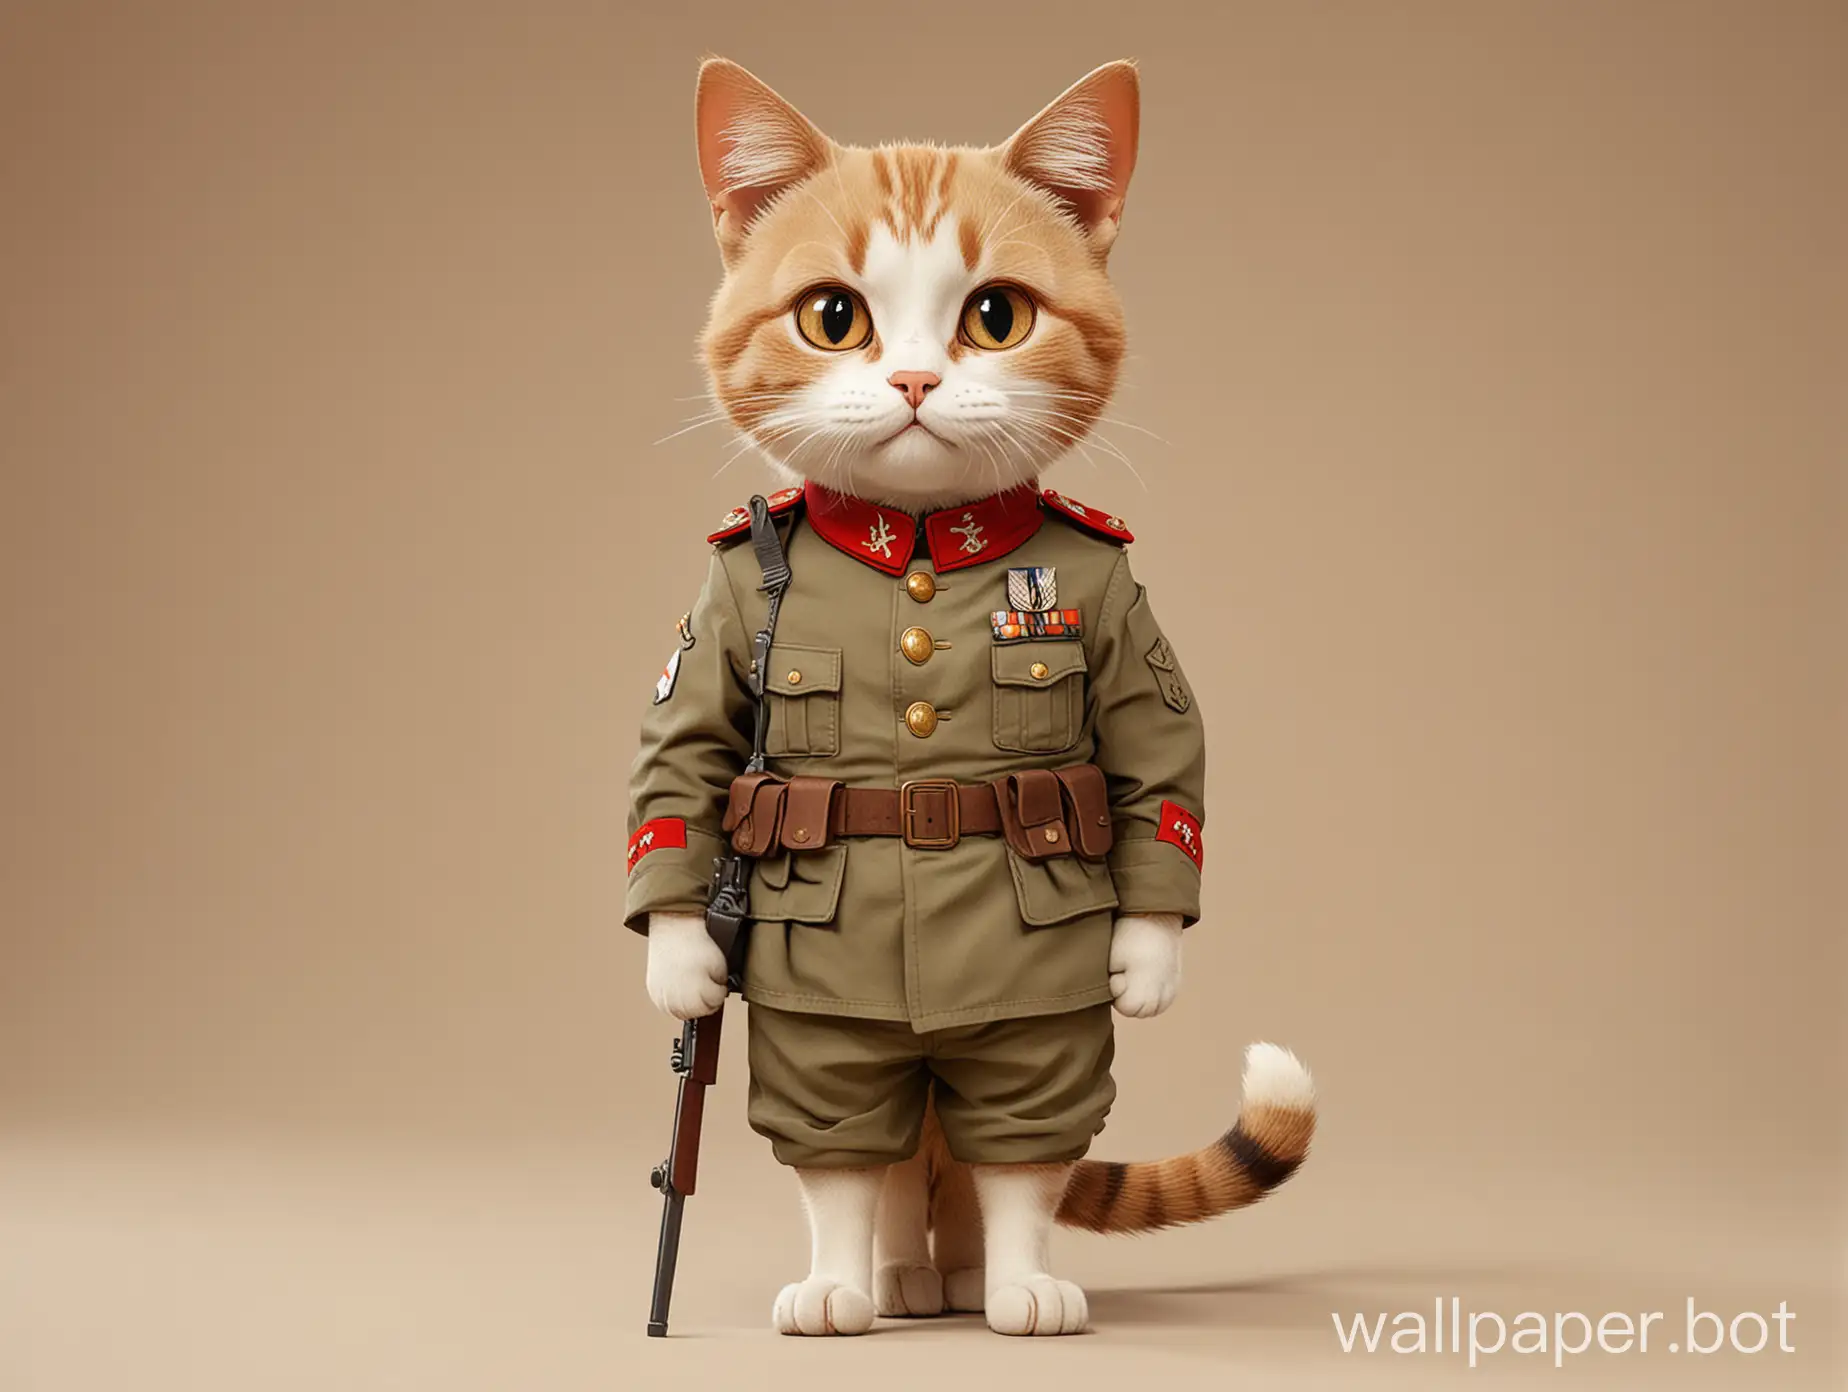 A street cat in cartoon style, wearing soldiers dress, full body with the plain beige color background